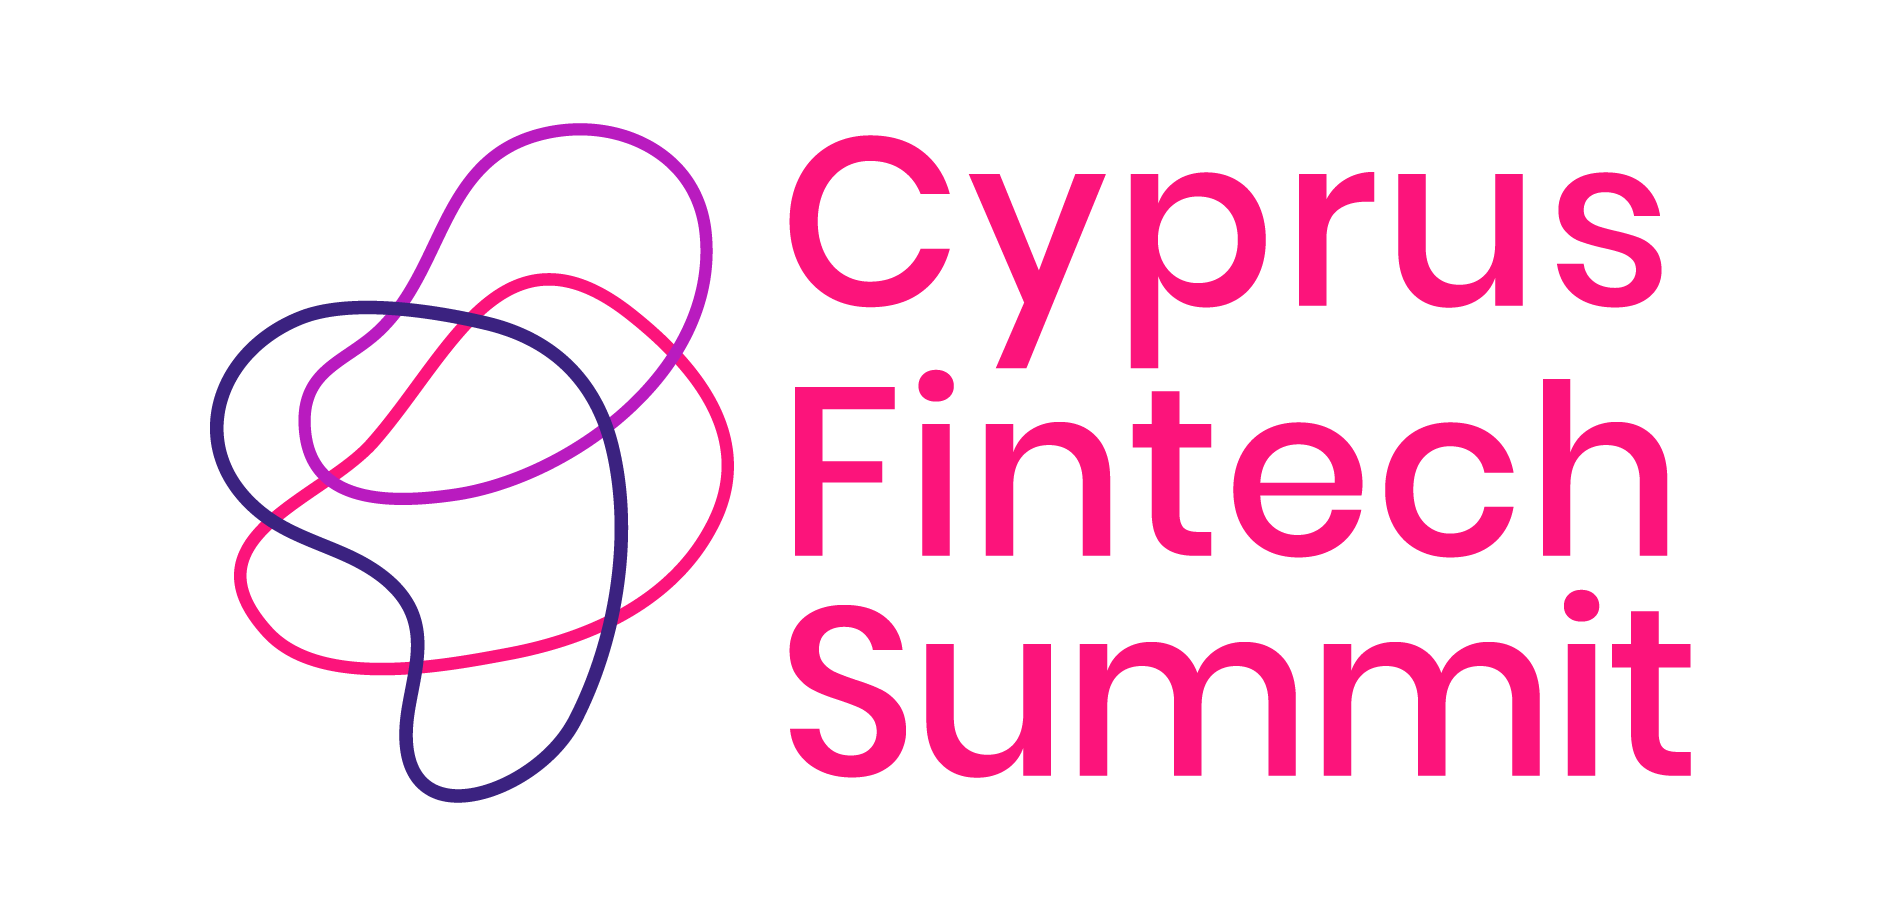 Cyprus Fintech Summit - 29 January 2021 at 3:30 PM GMT+2